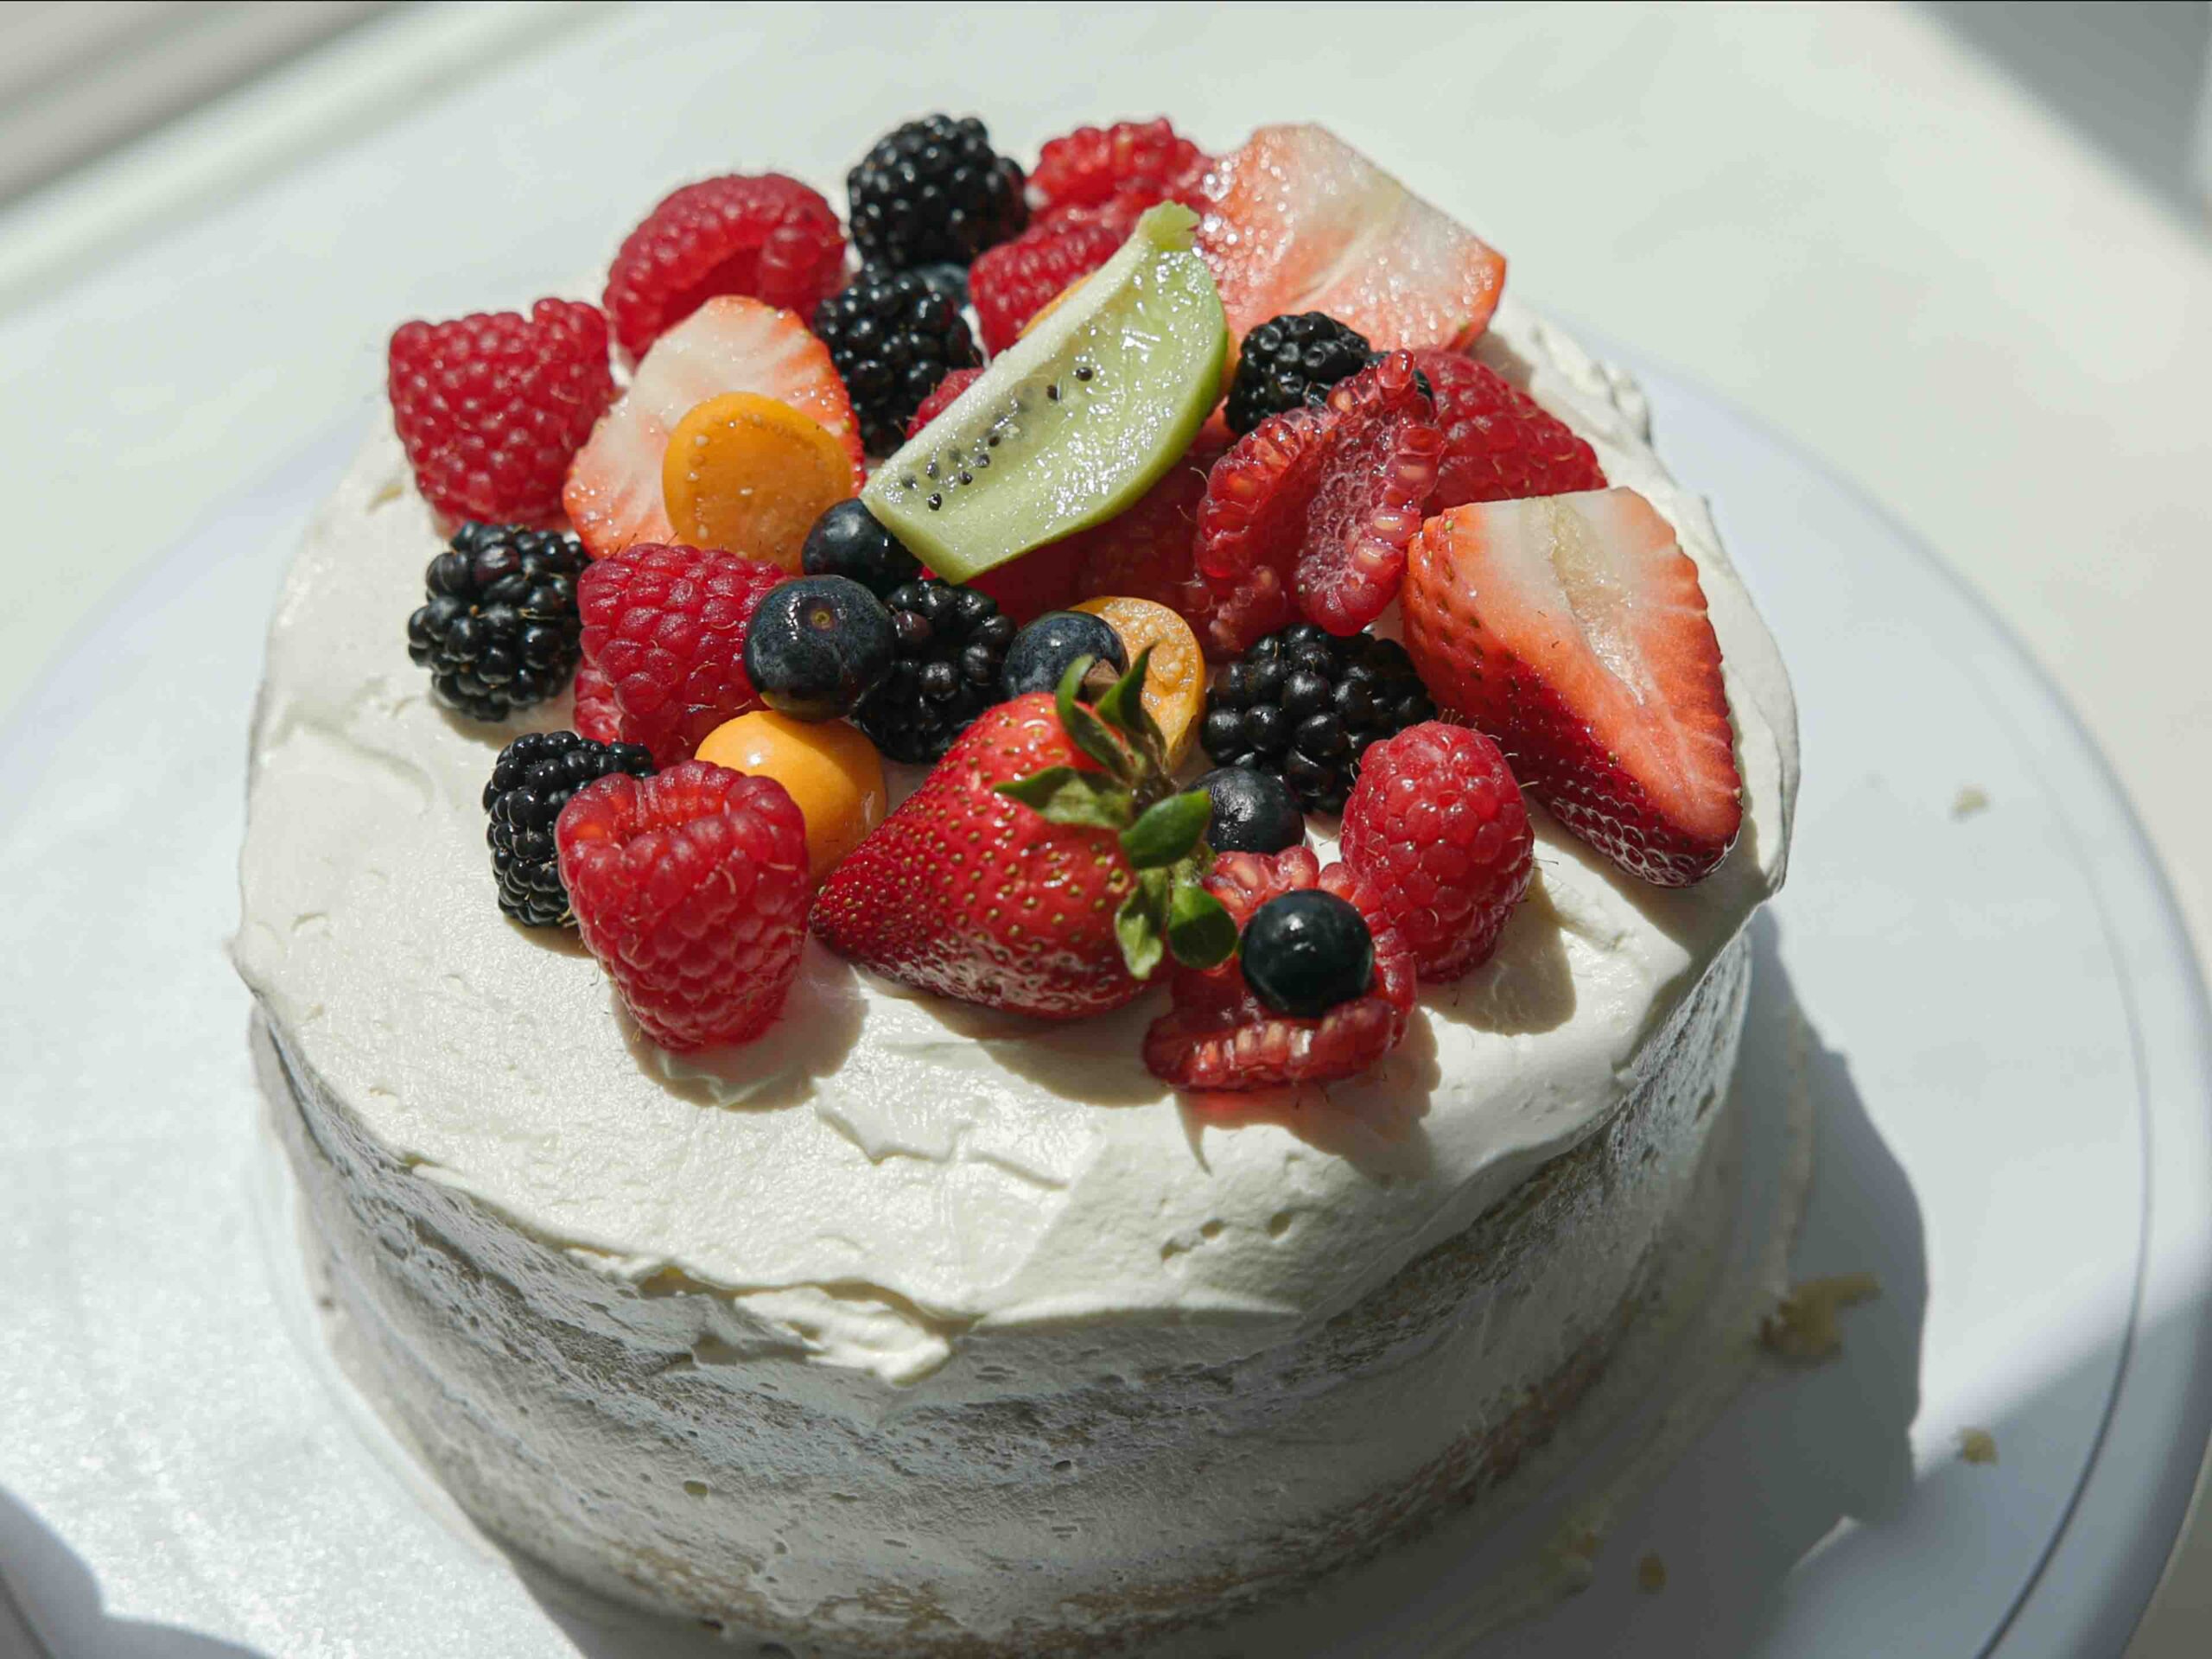 Decorated sponge cake with fruit and whipped cream